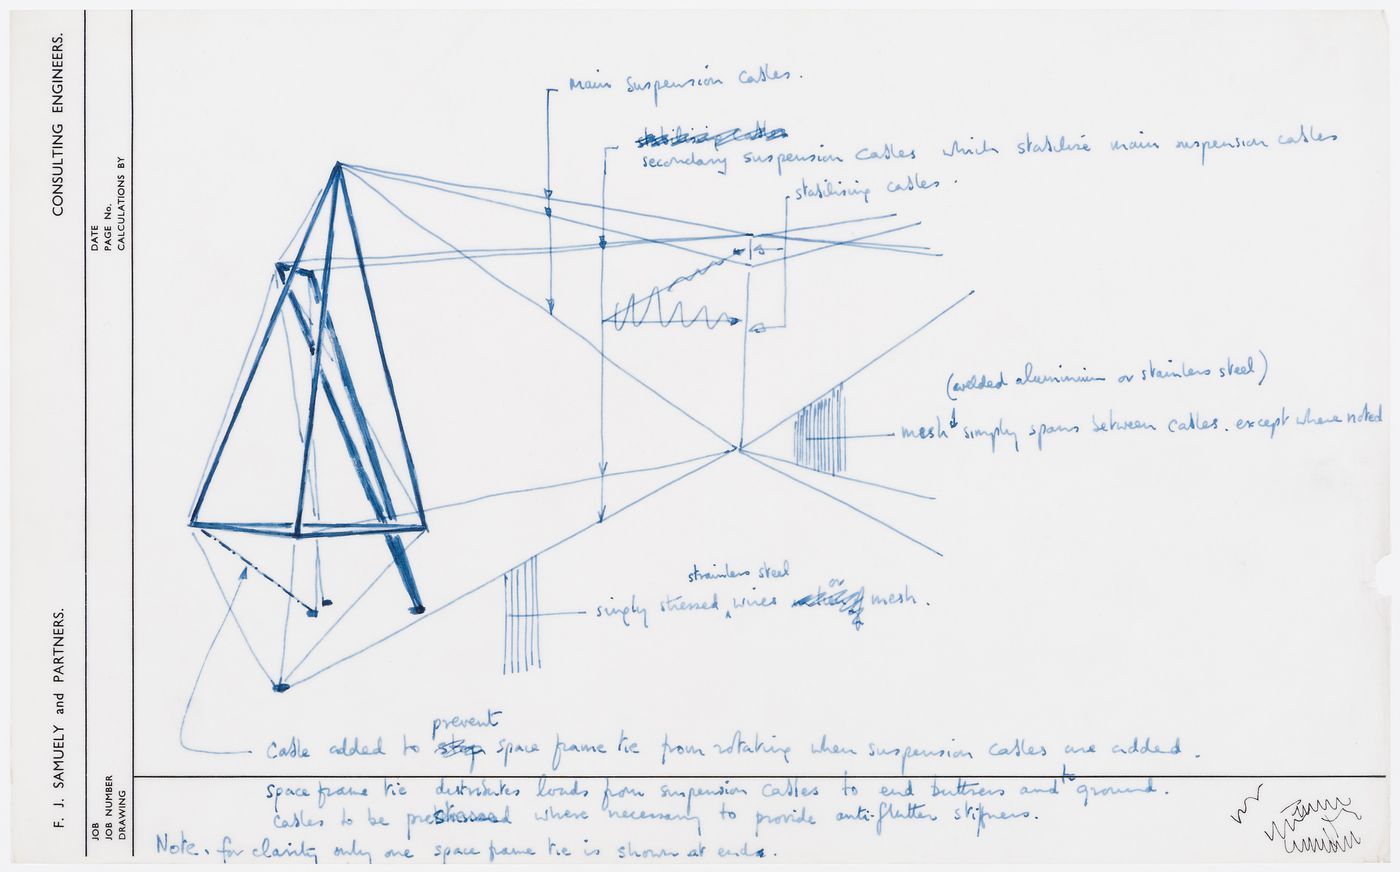 Technical sketch showing cables and space frame tie for the Aviary at the London Zoo, London, England